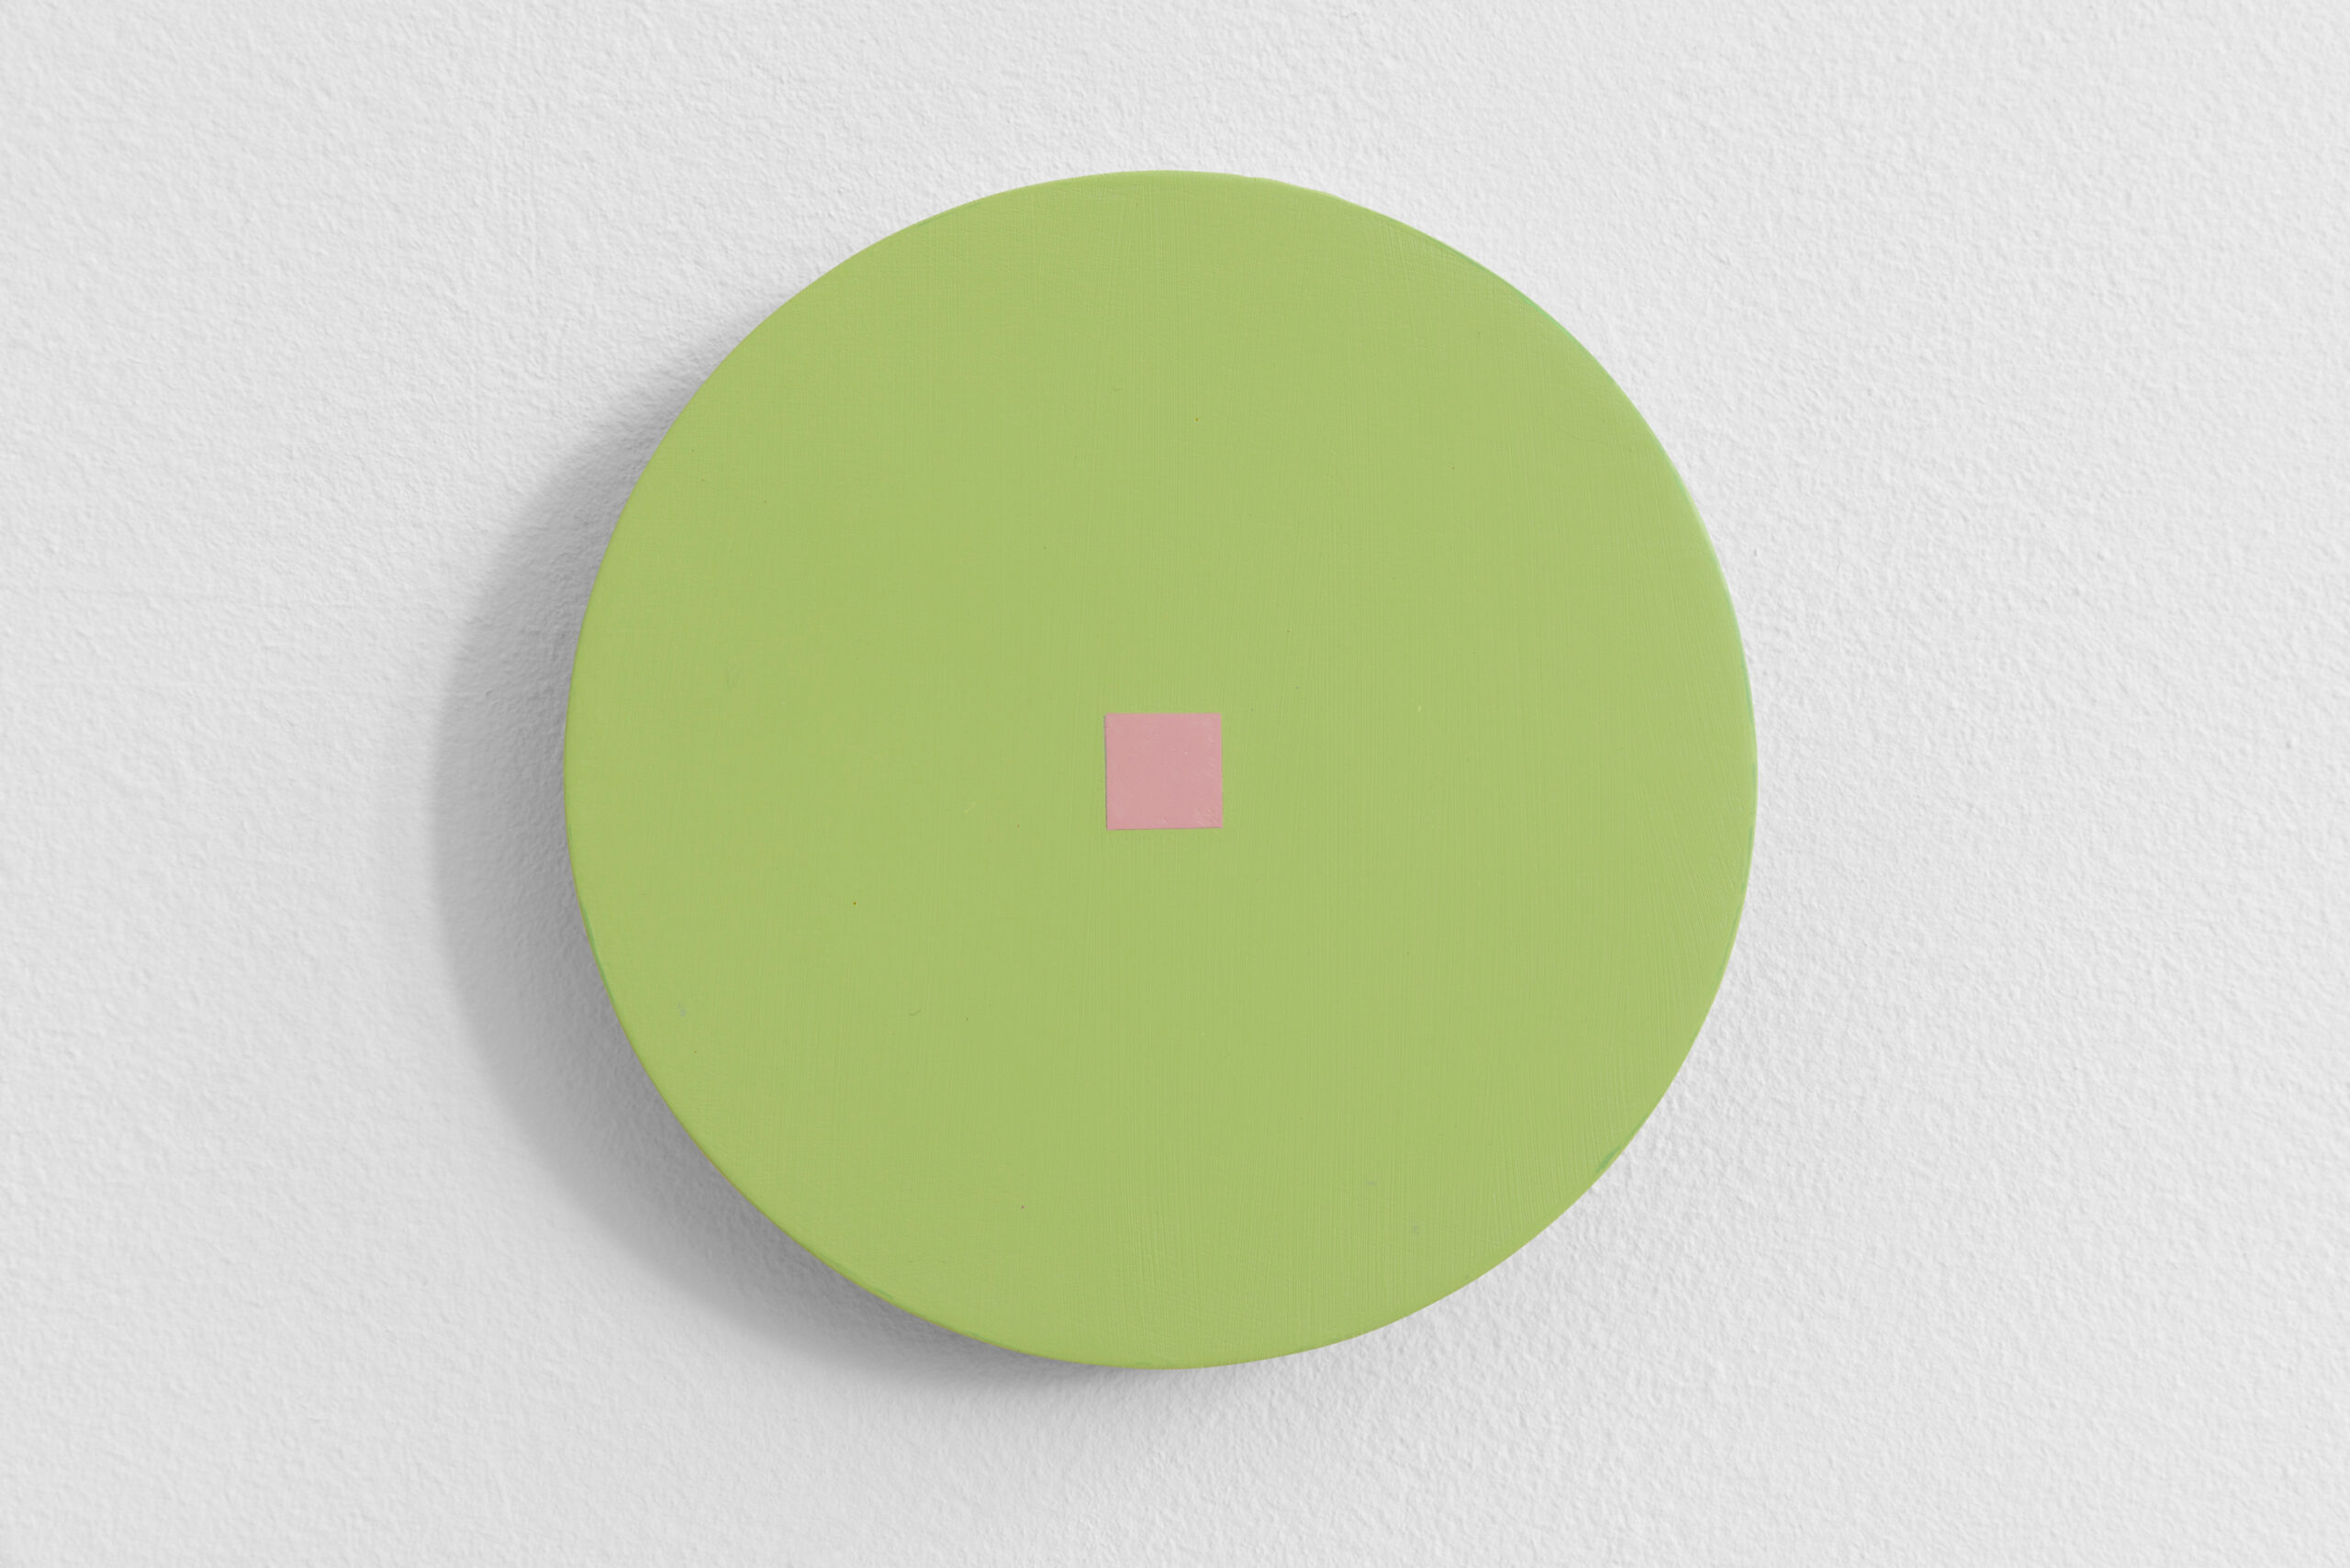 In the beginning (pale green and pink)